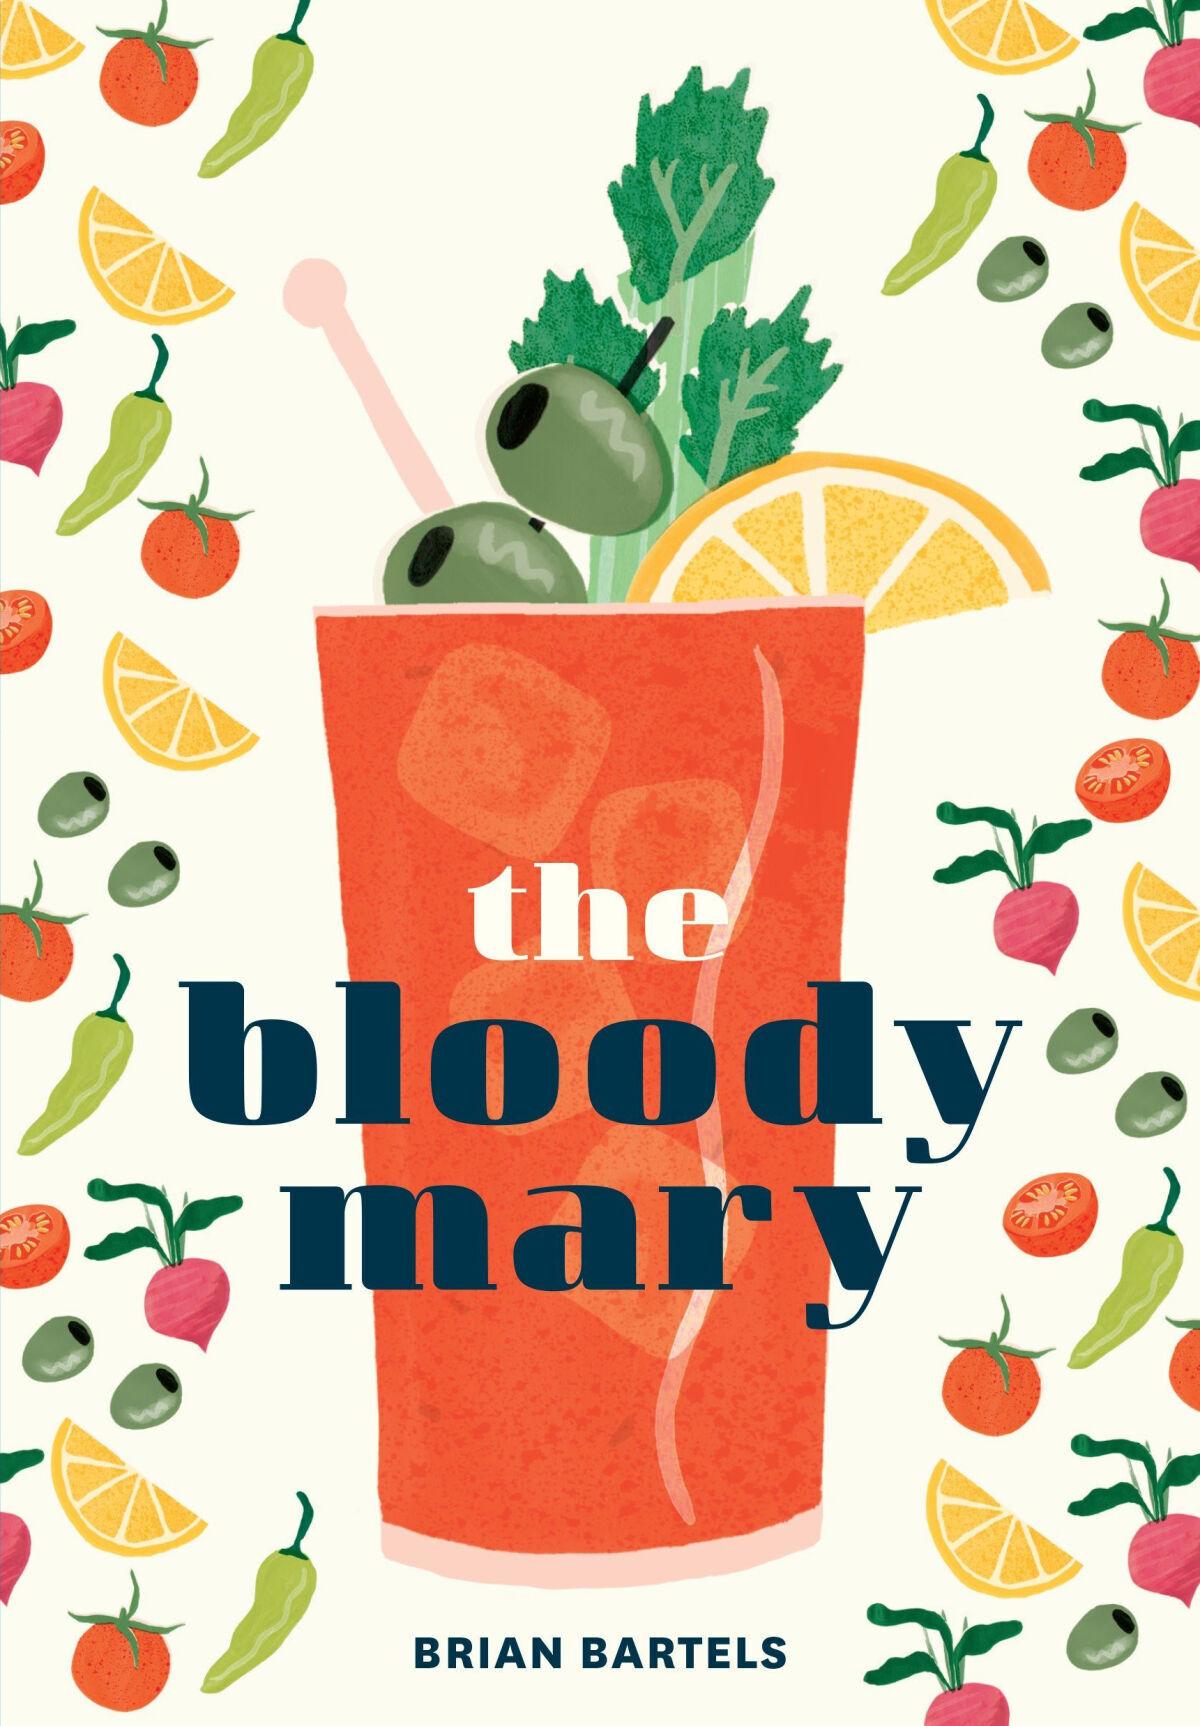 Bloody mary book